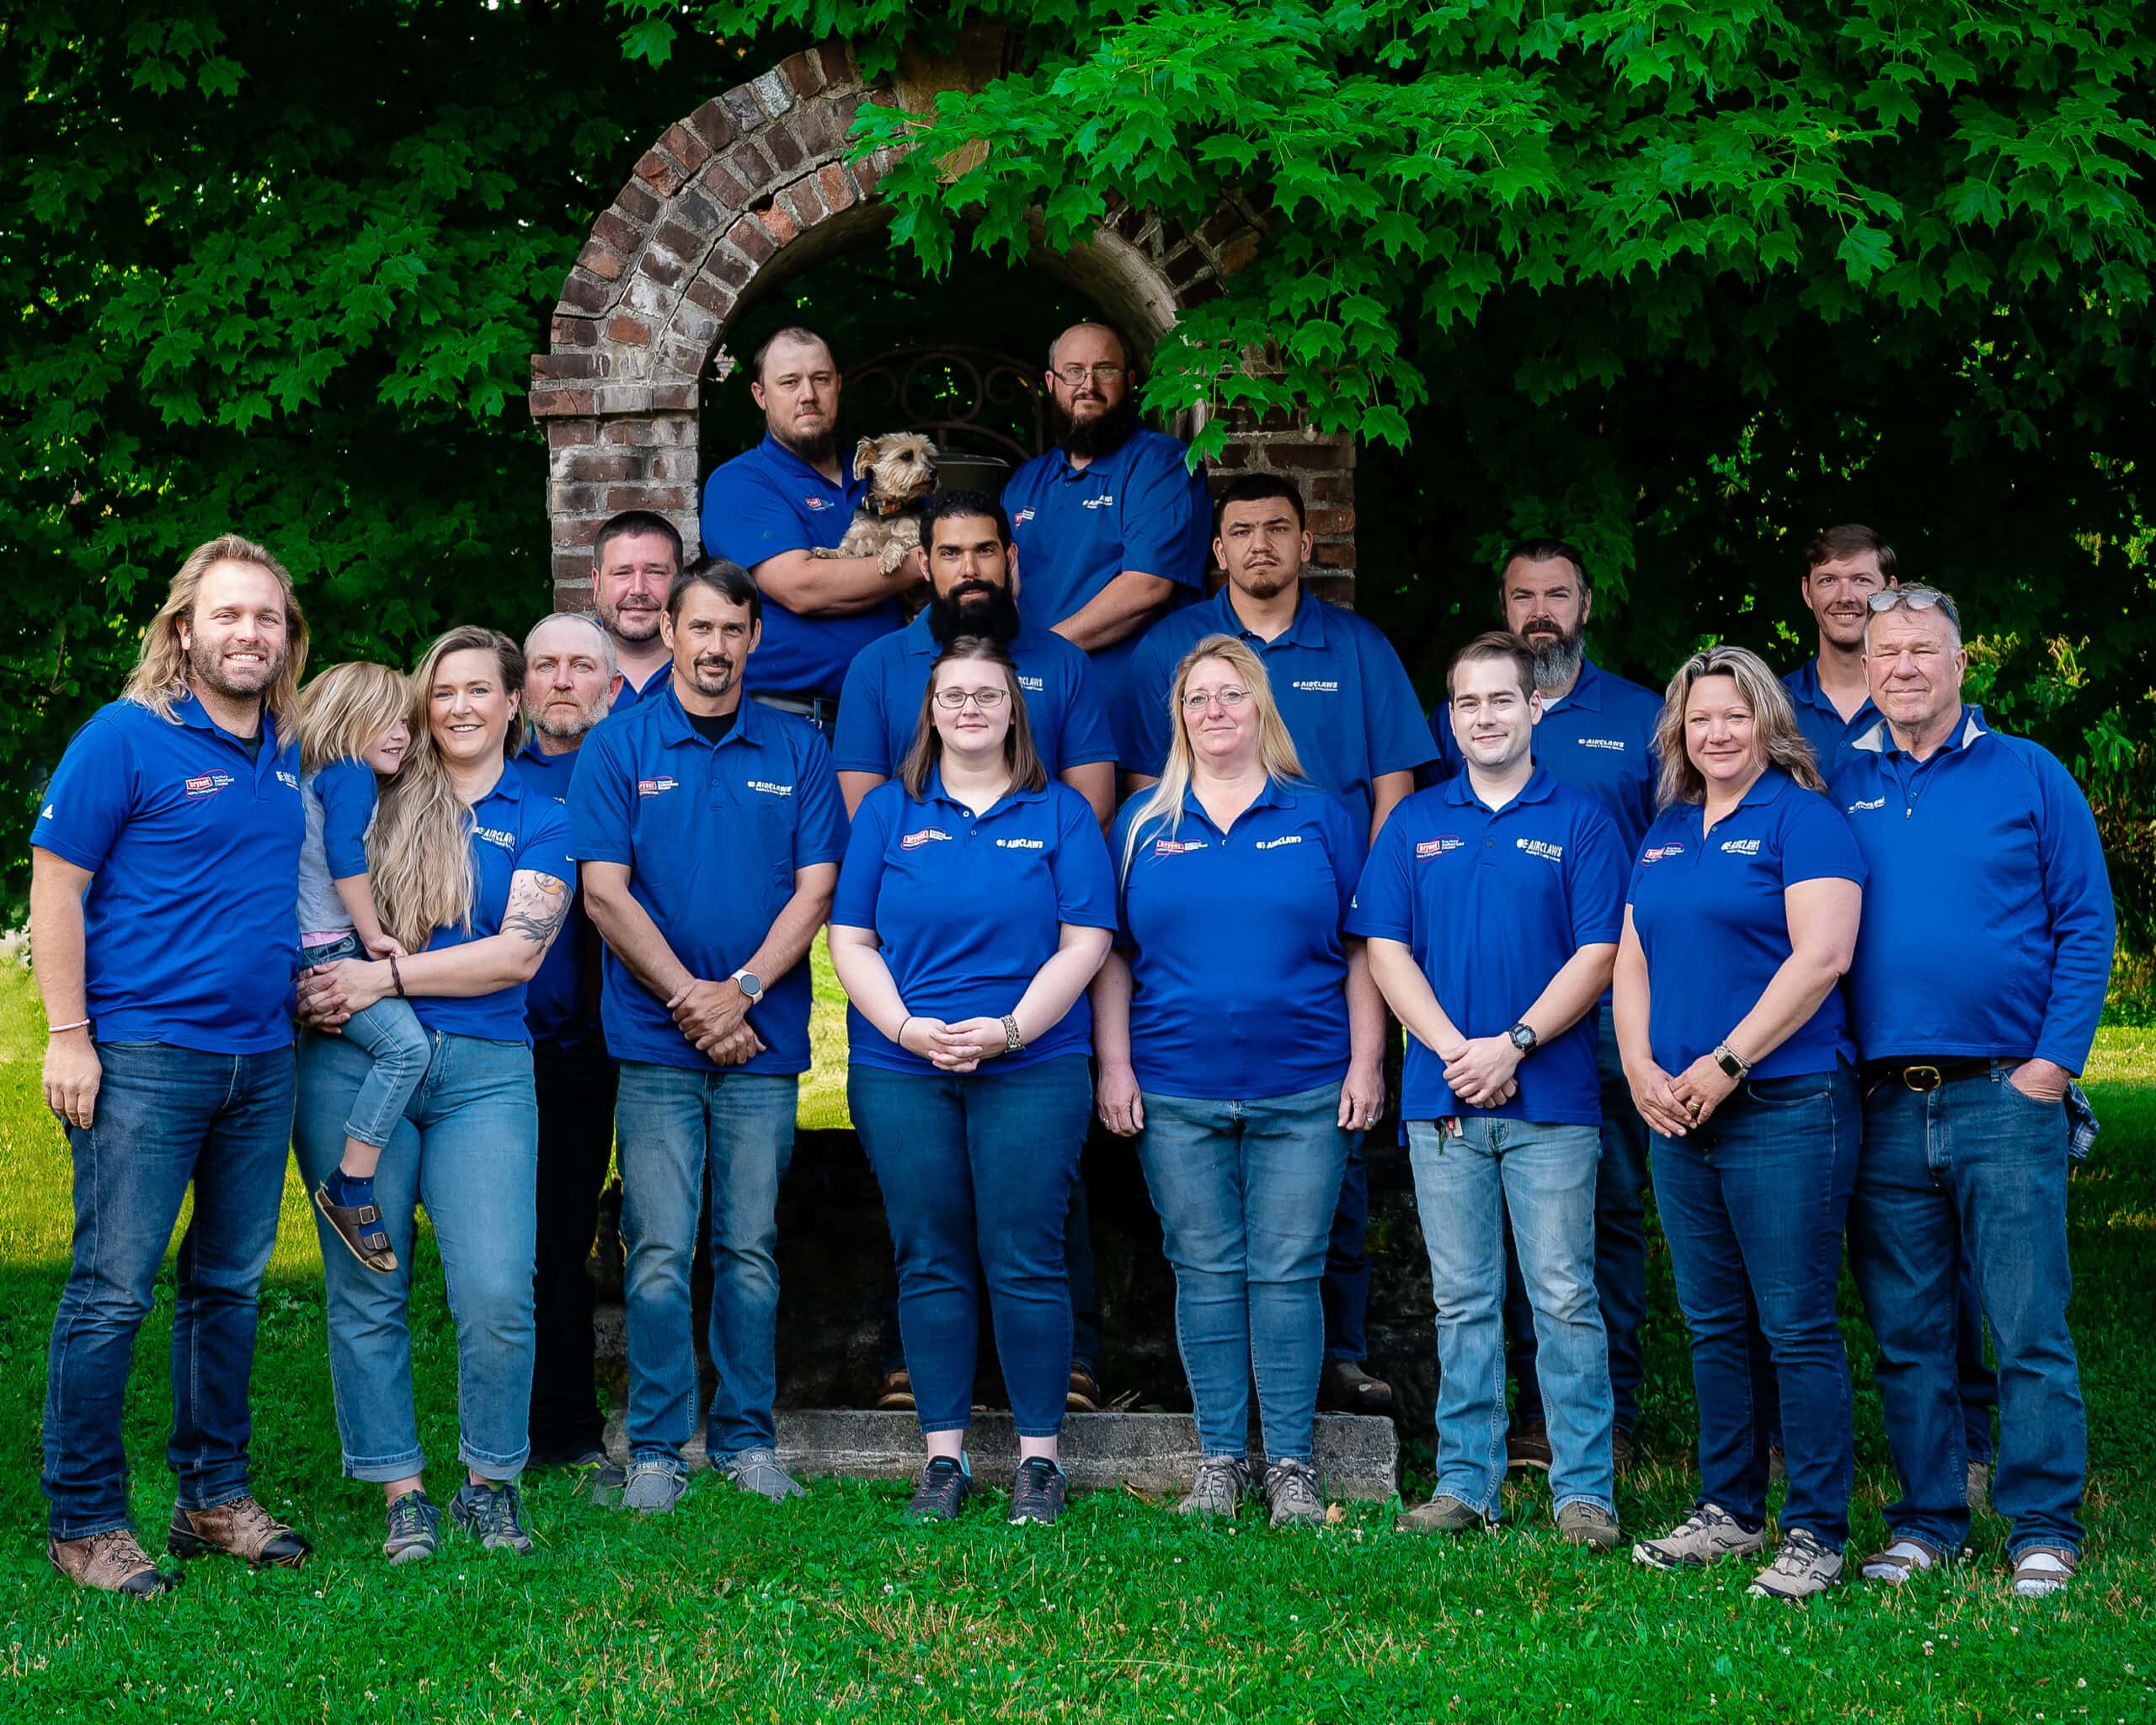 Airclaws team photo. A heating and cooling company in Amesville, OH.